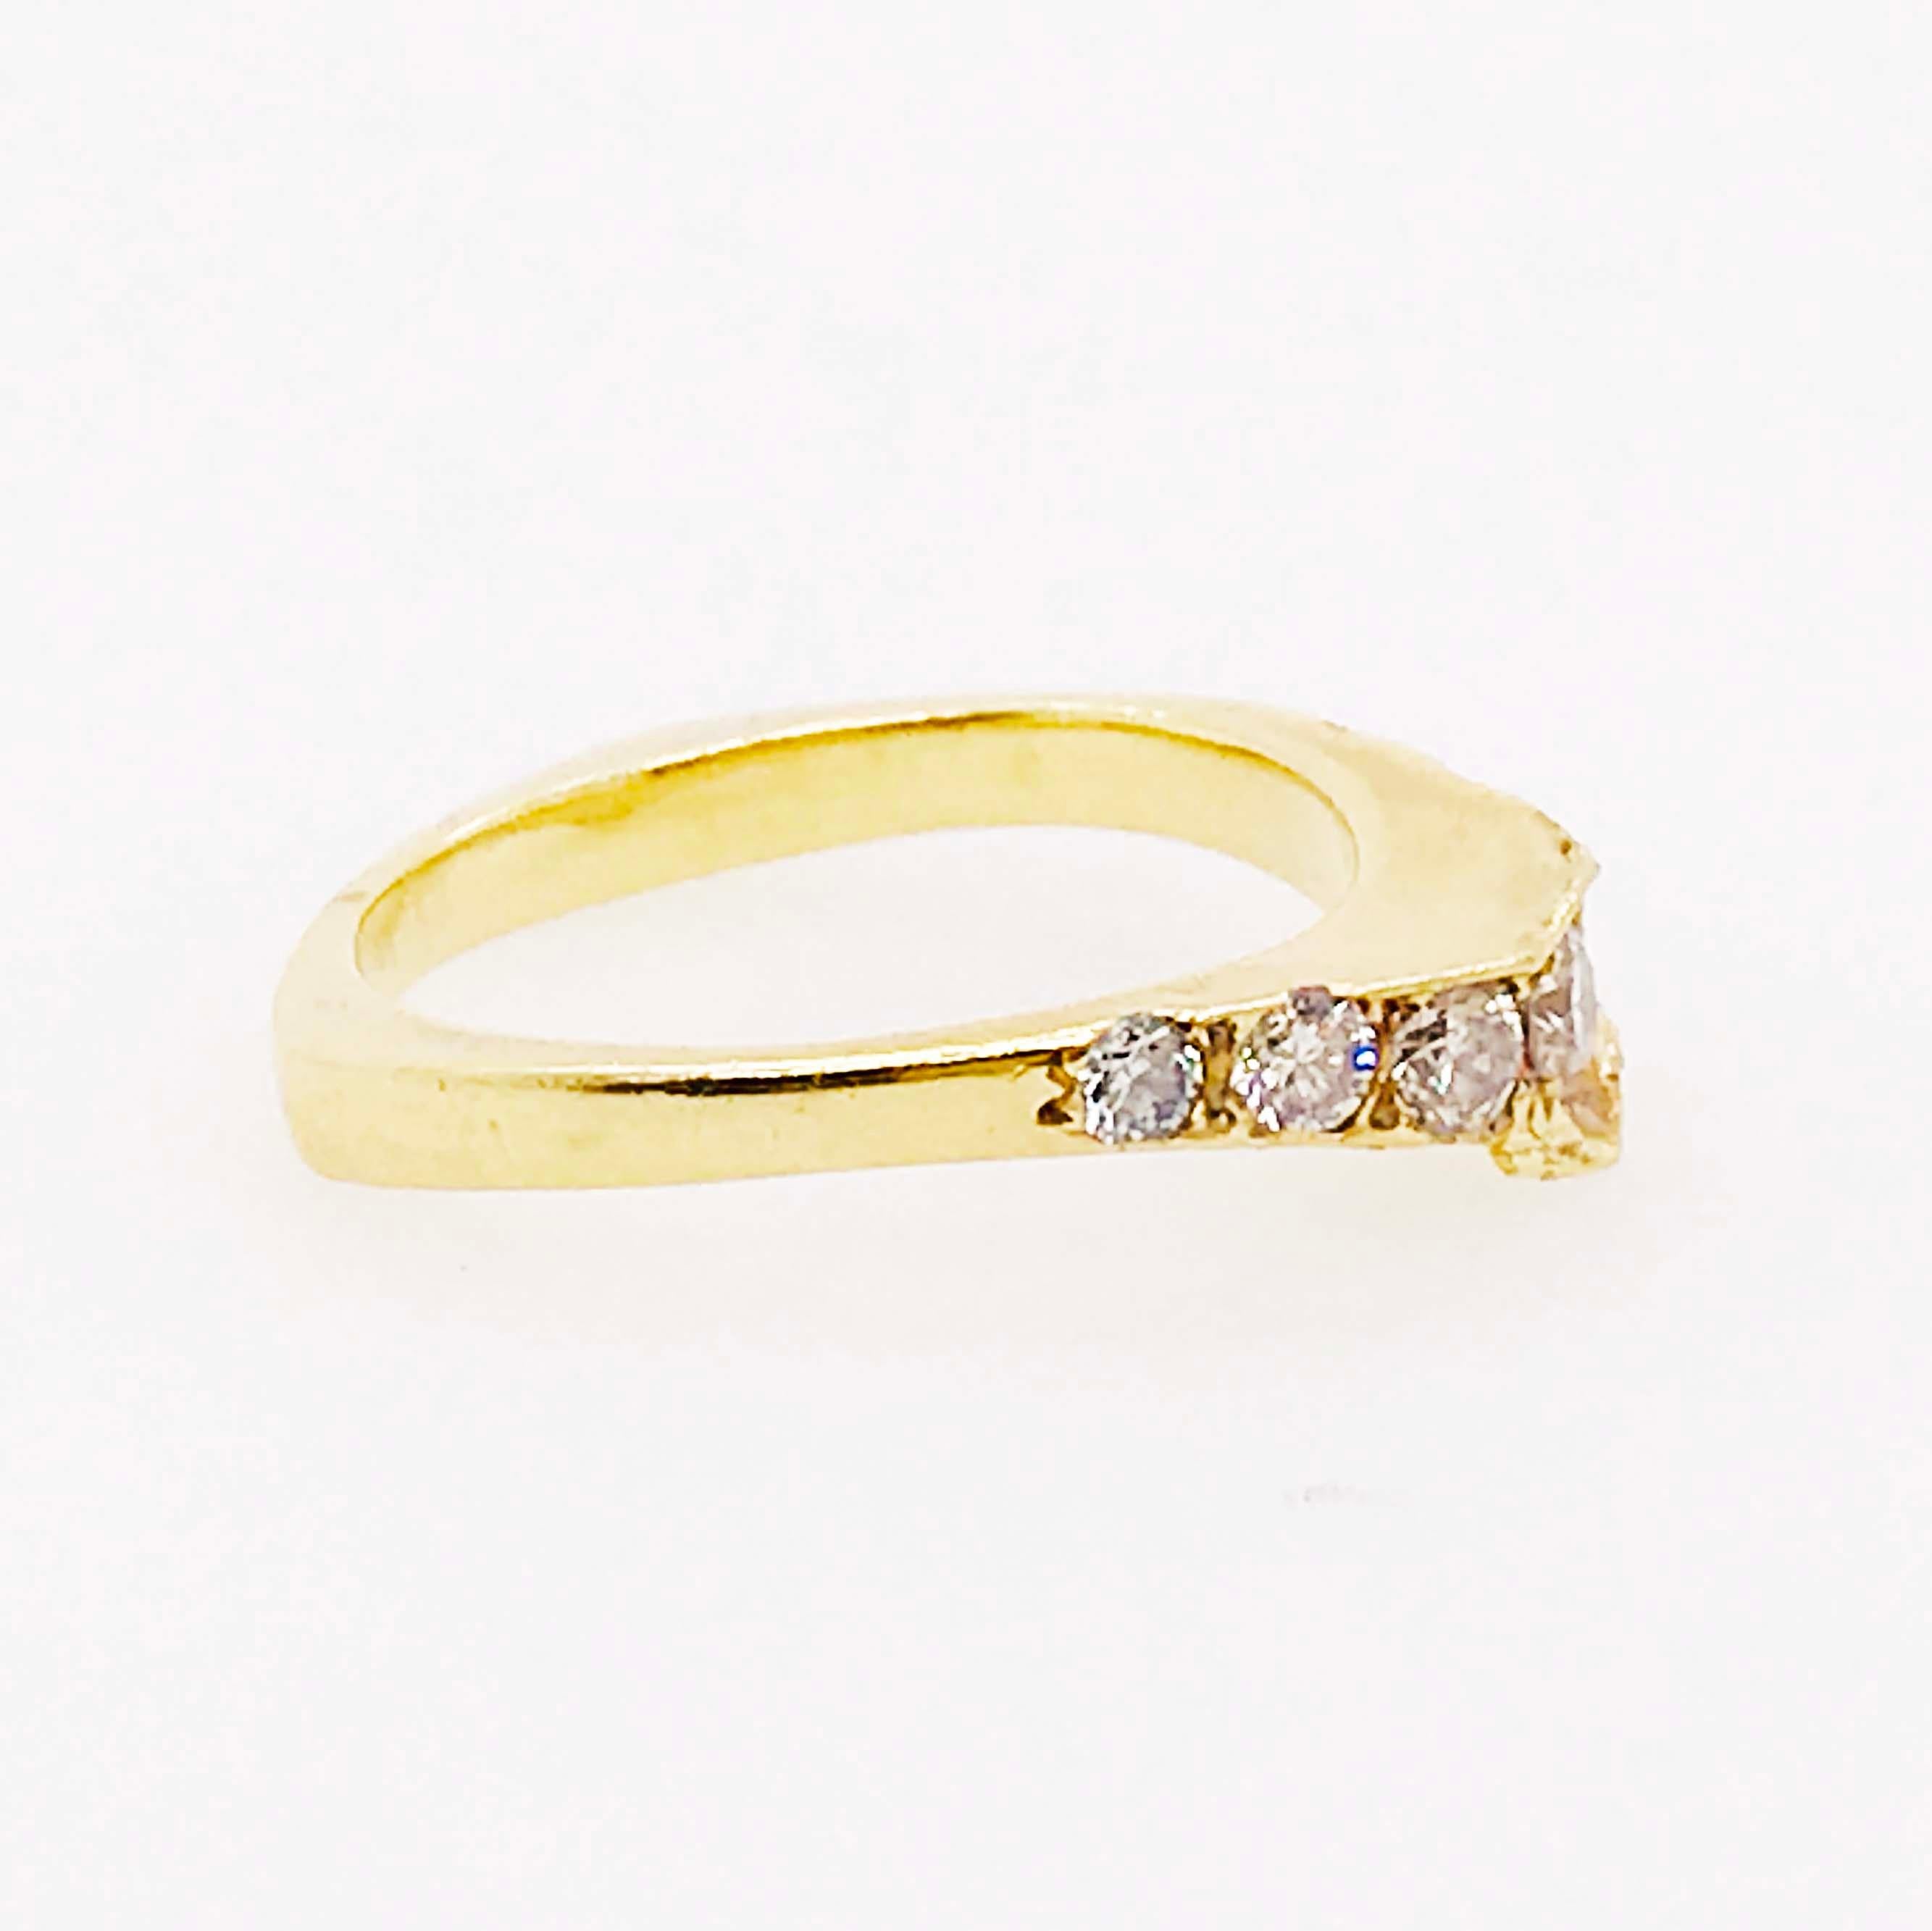 Curved Diamond Ring, 0.30 Carat Diamond, Estate Diamond Wedding Band 18K Gold In Excellent Condition For Sale In Austin, TX